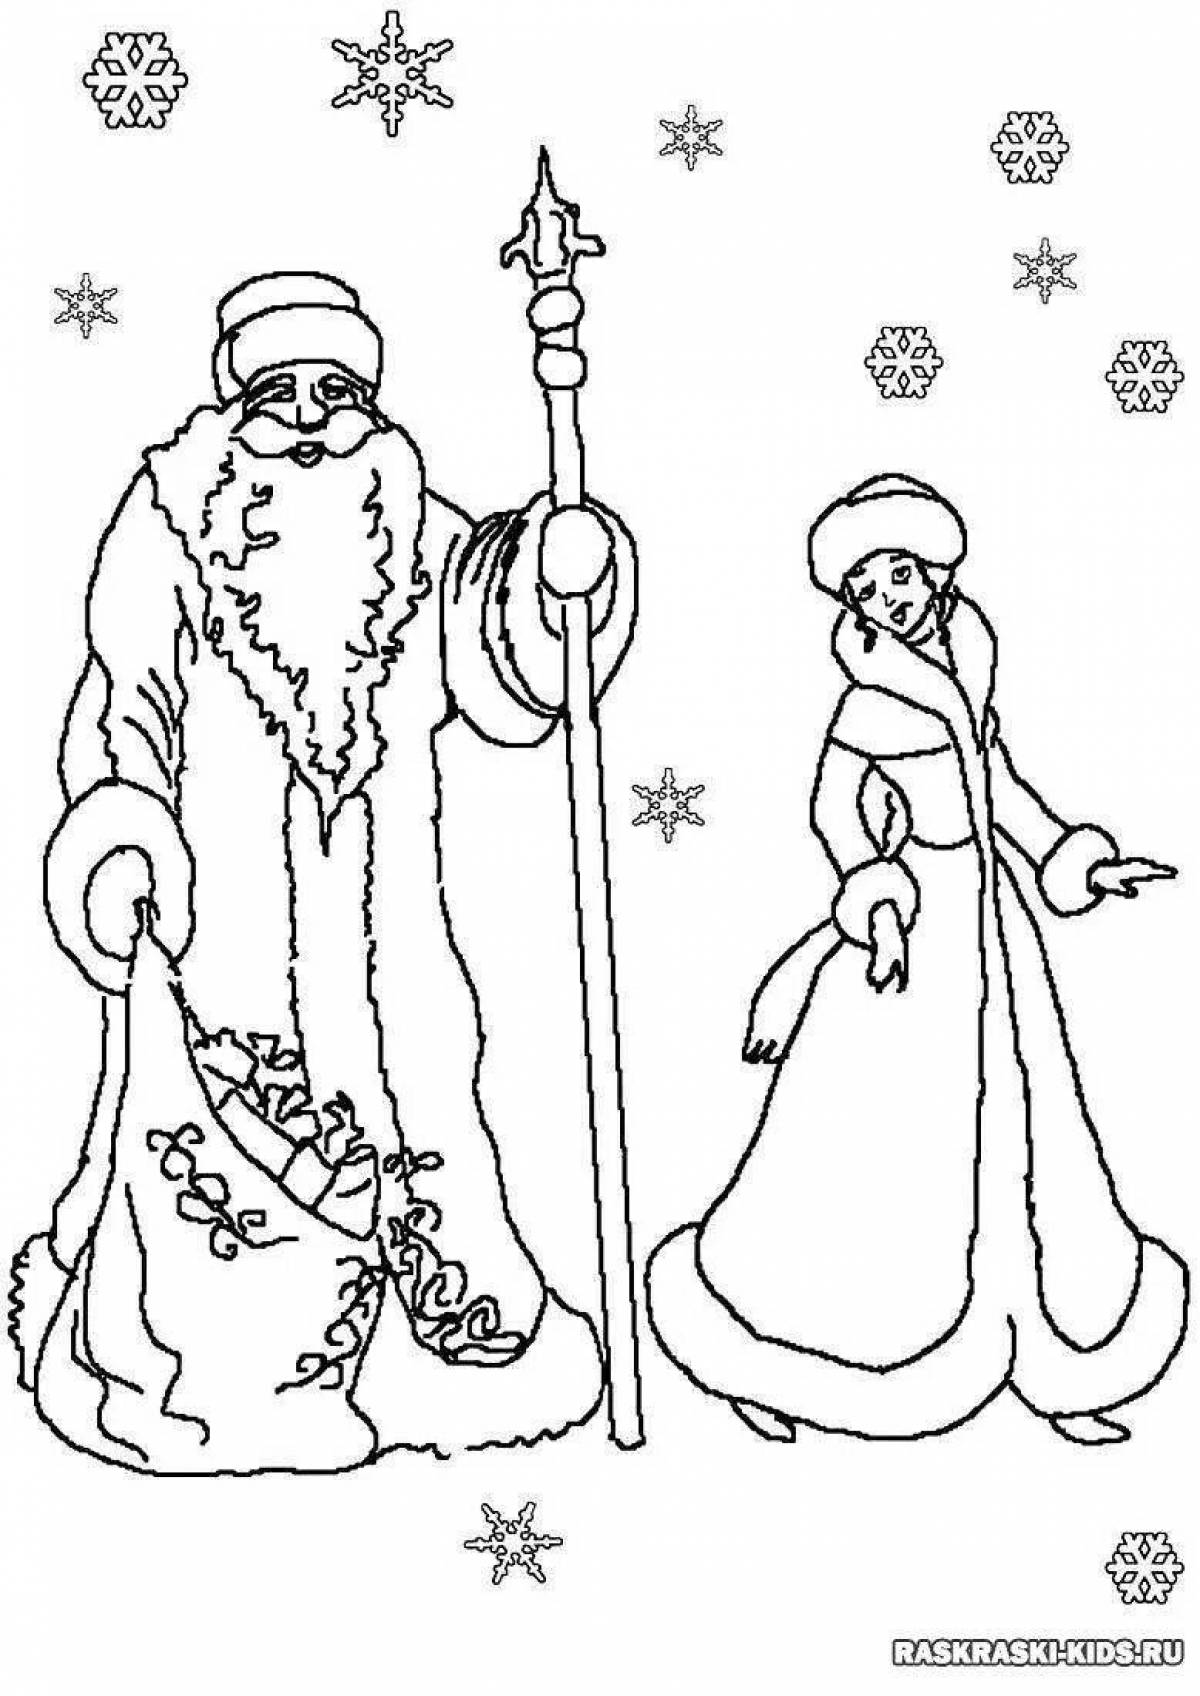 Christmas coloring book of Santa Claus and Snow Maiden